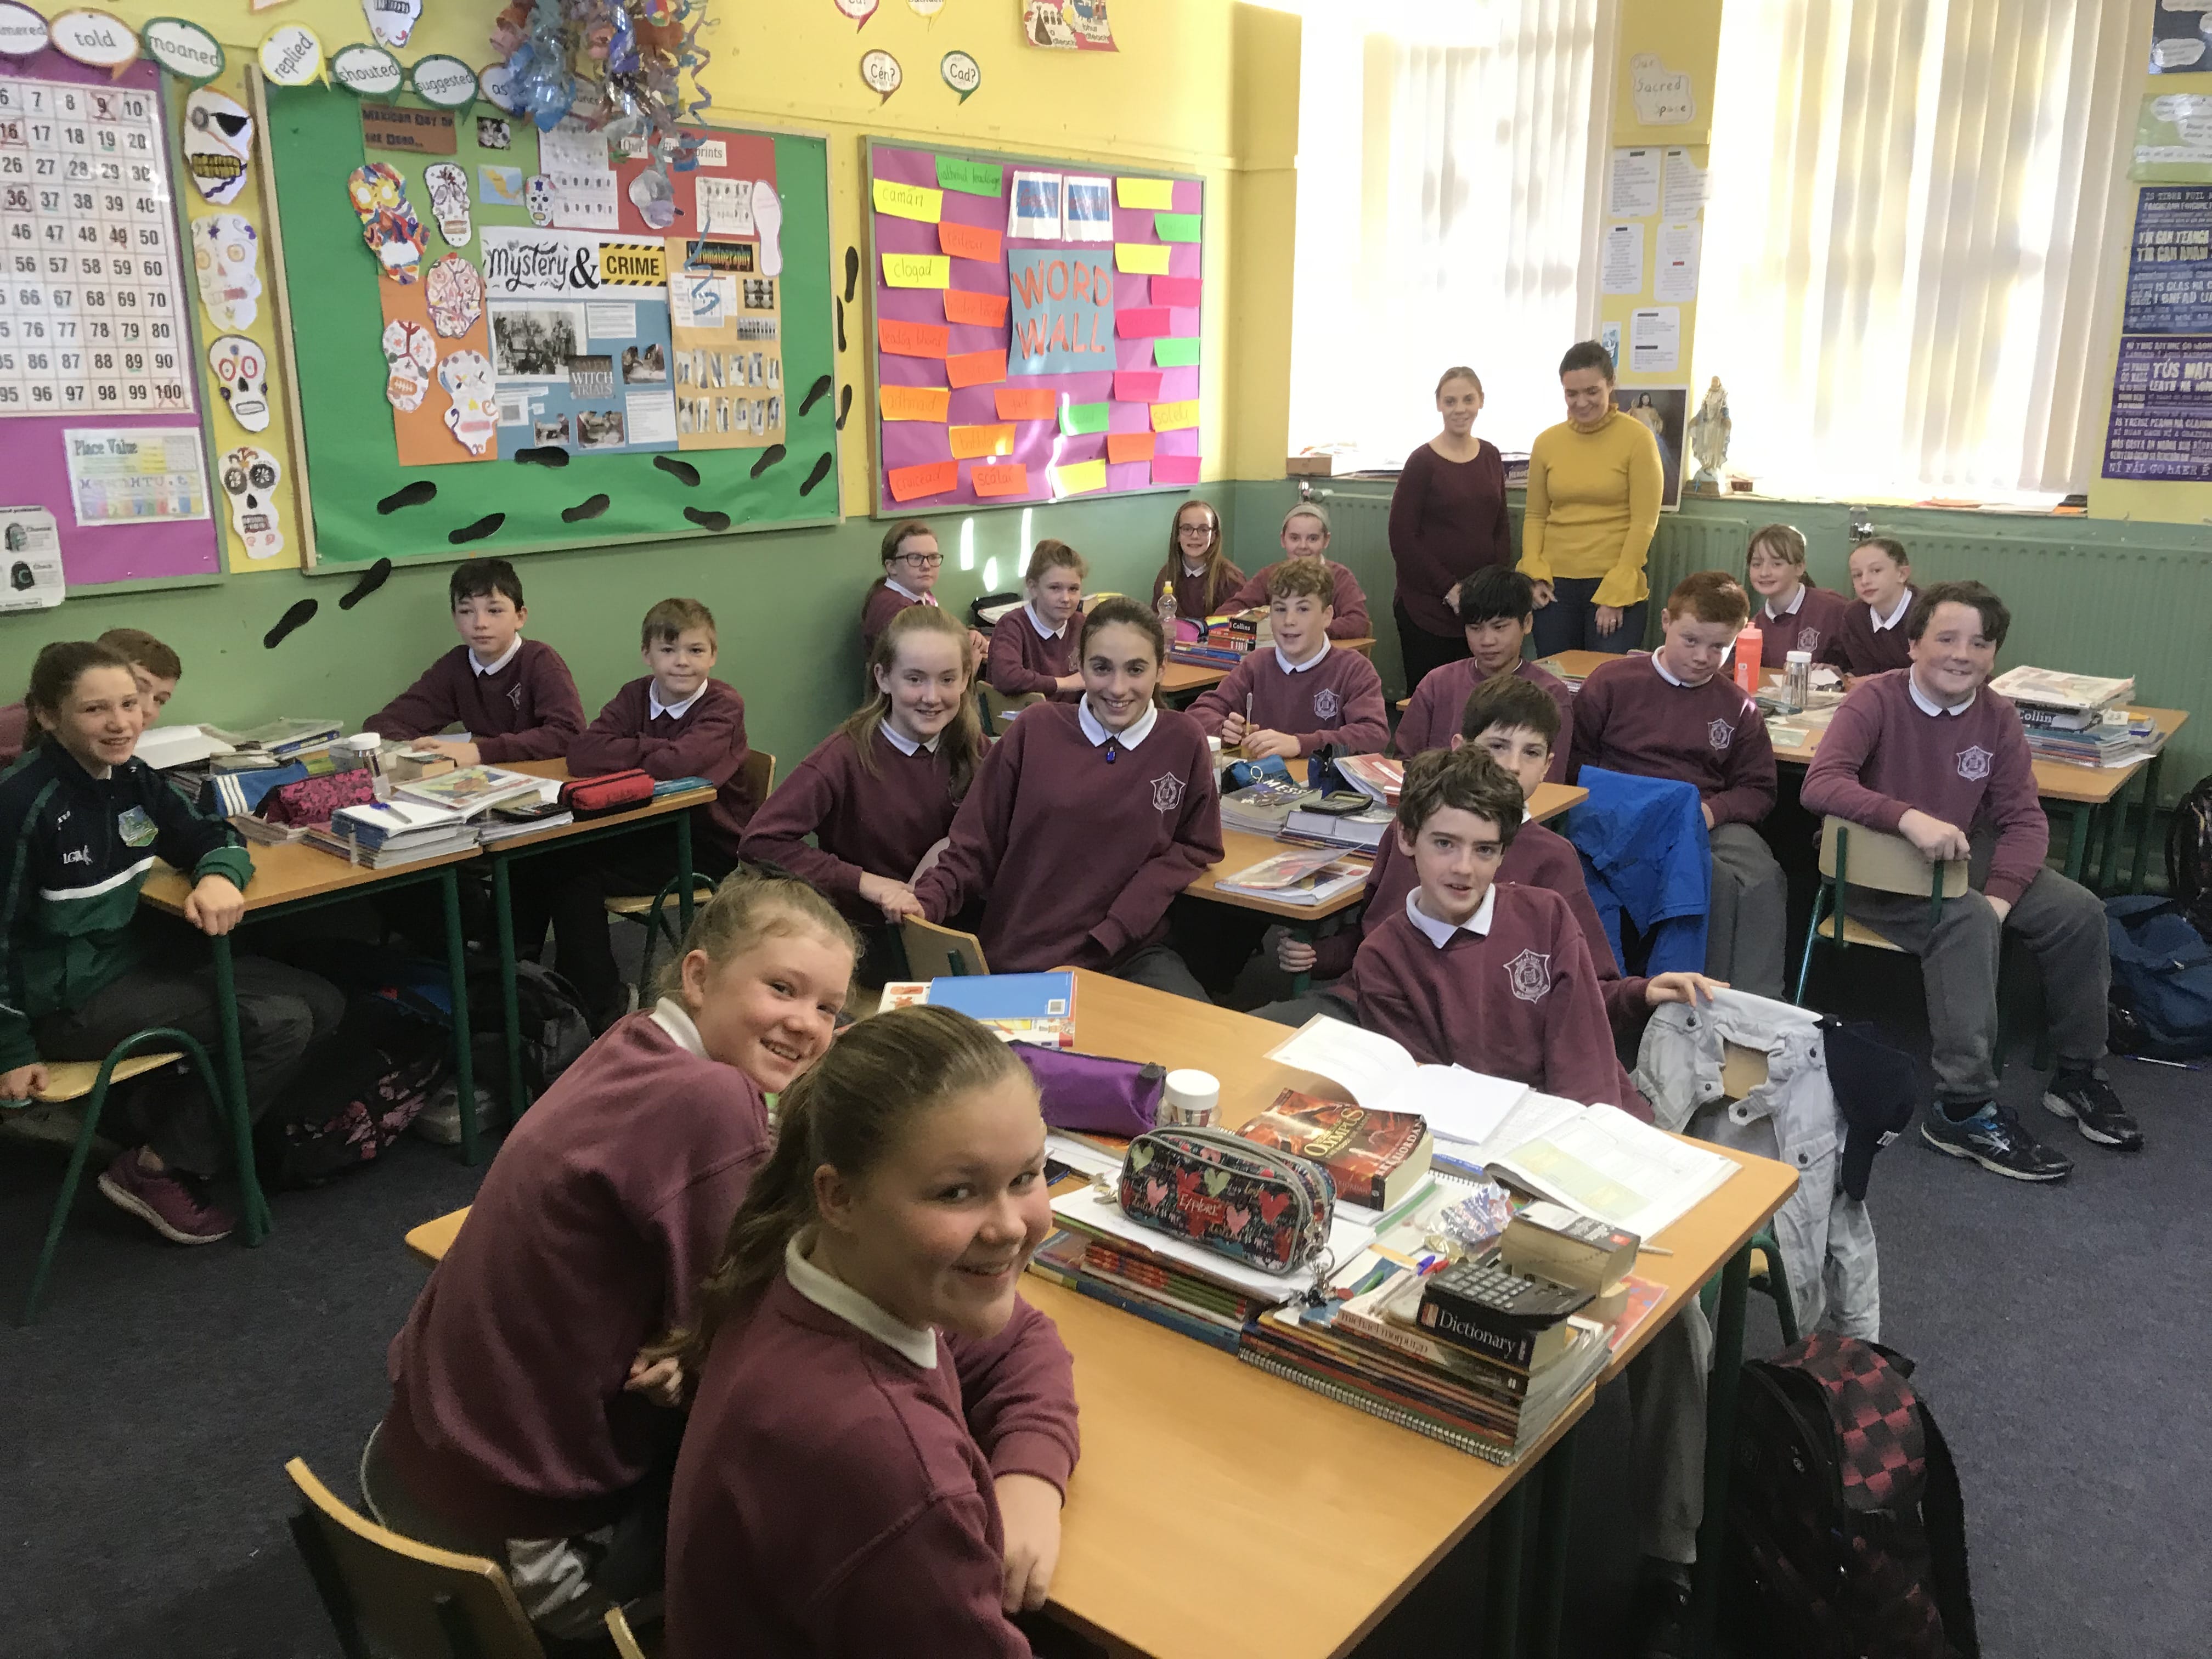 Nov 2017: The Sixth Class students in Shanagolden National School along with Ms Culhane and Ms Corkery Desmond College Teachers